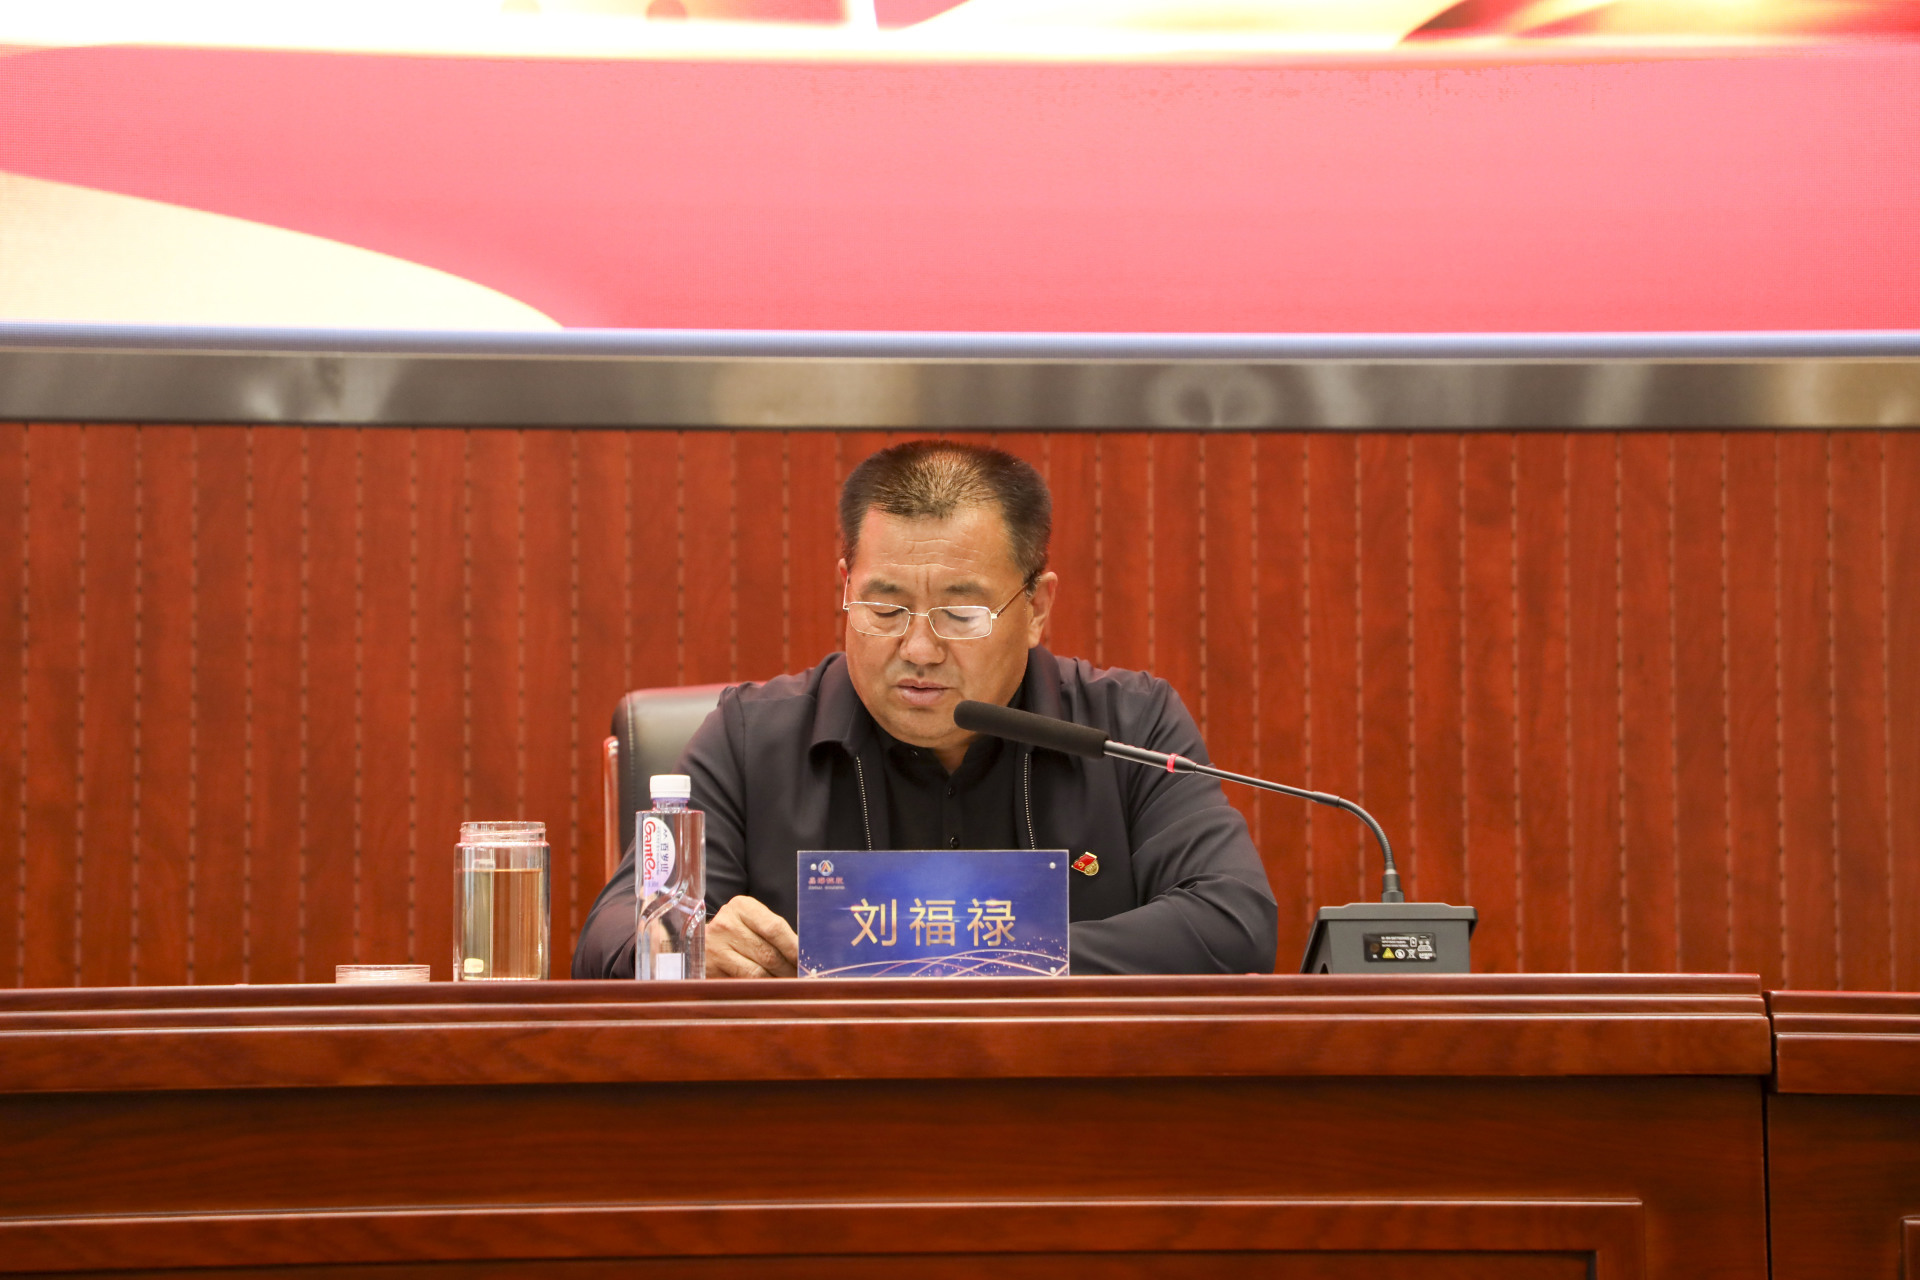 Xinhai Party Committee Held Party History Learning and Education Mobilization Meeting to Celebrate the 100 Anniversary of the Founding of the Party